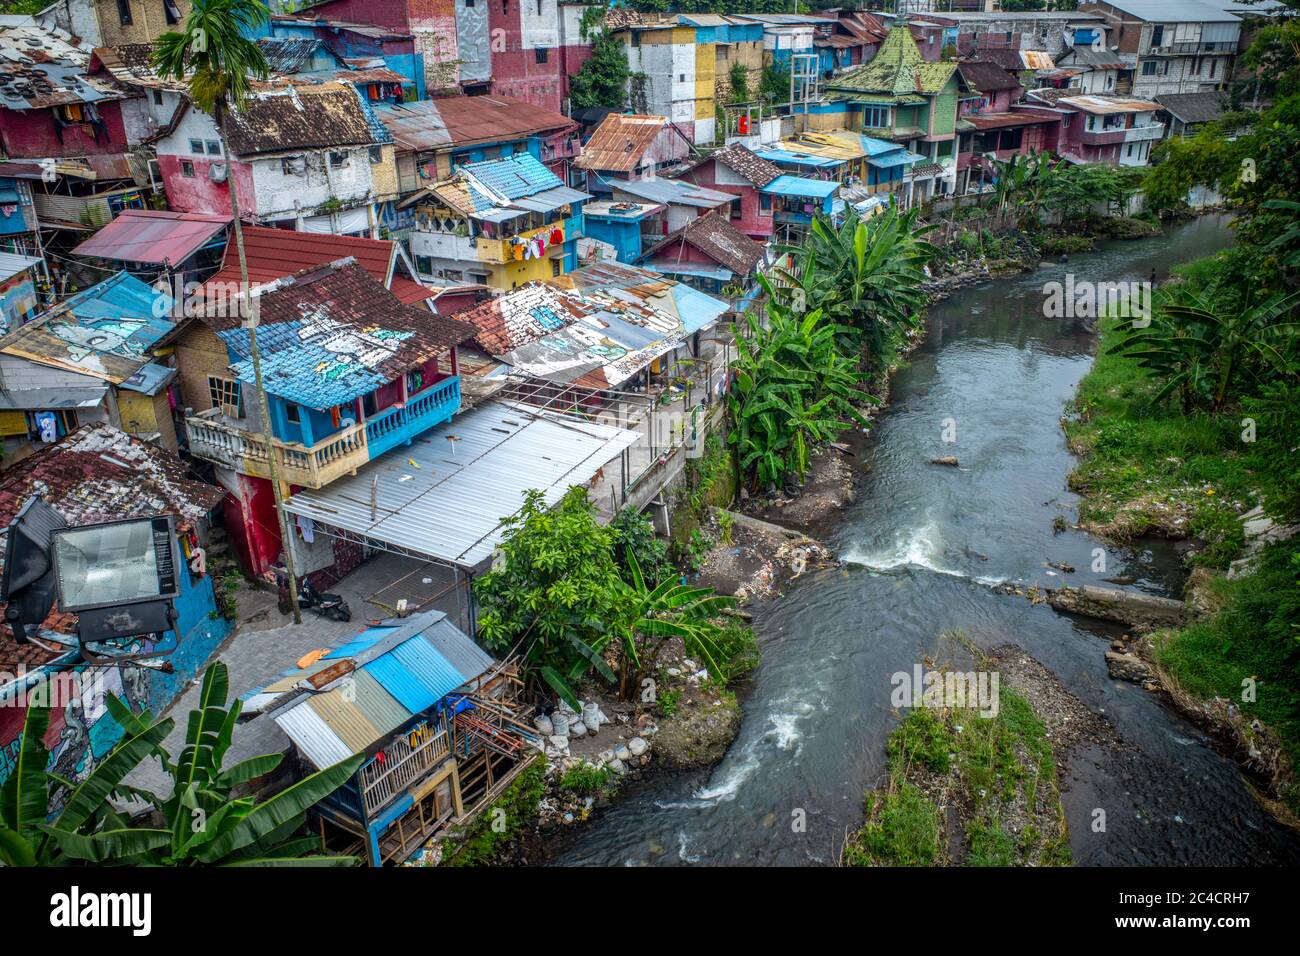 Colorful homes tightly packed together along a river in Indonesia. Stock Photo